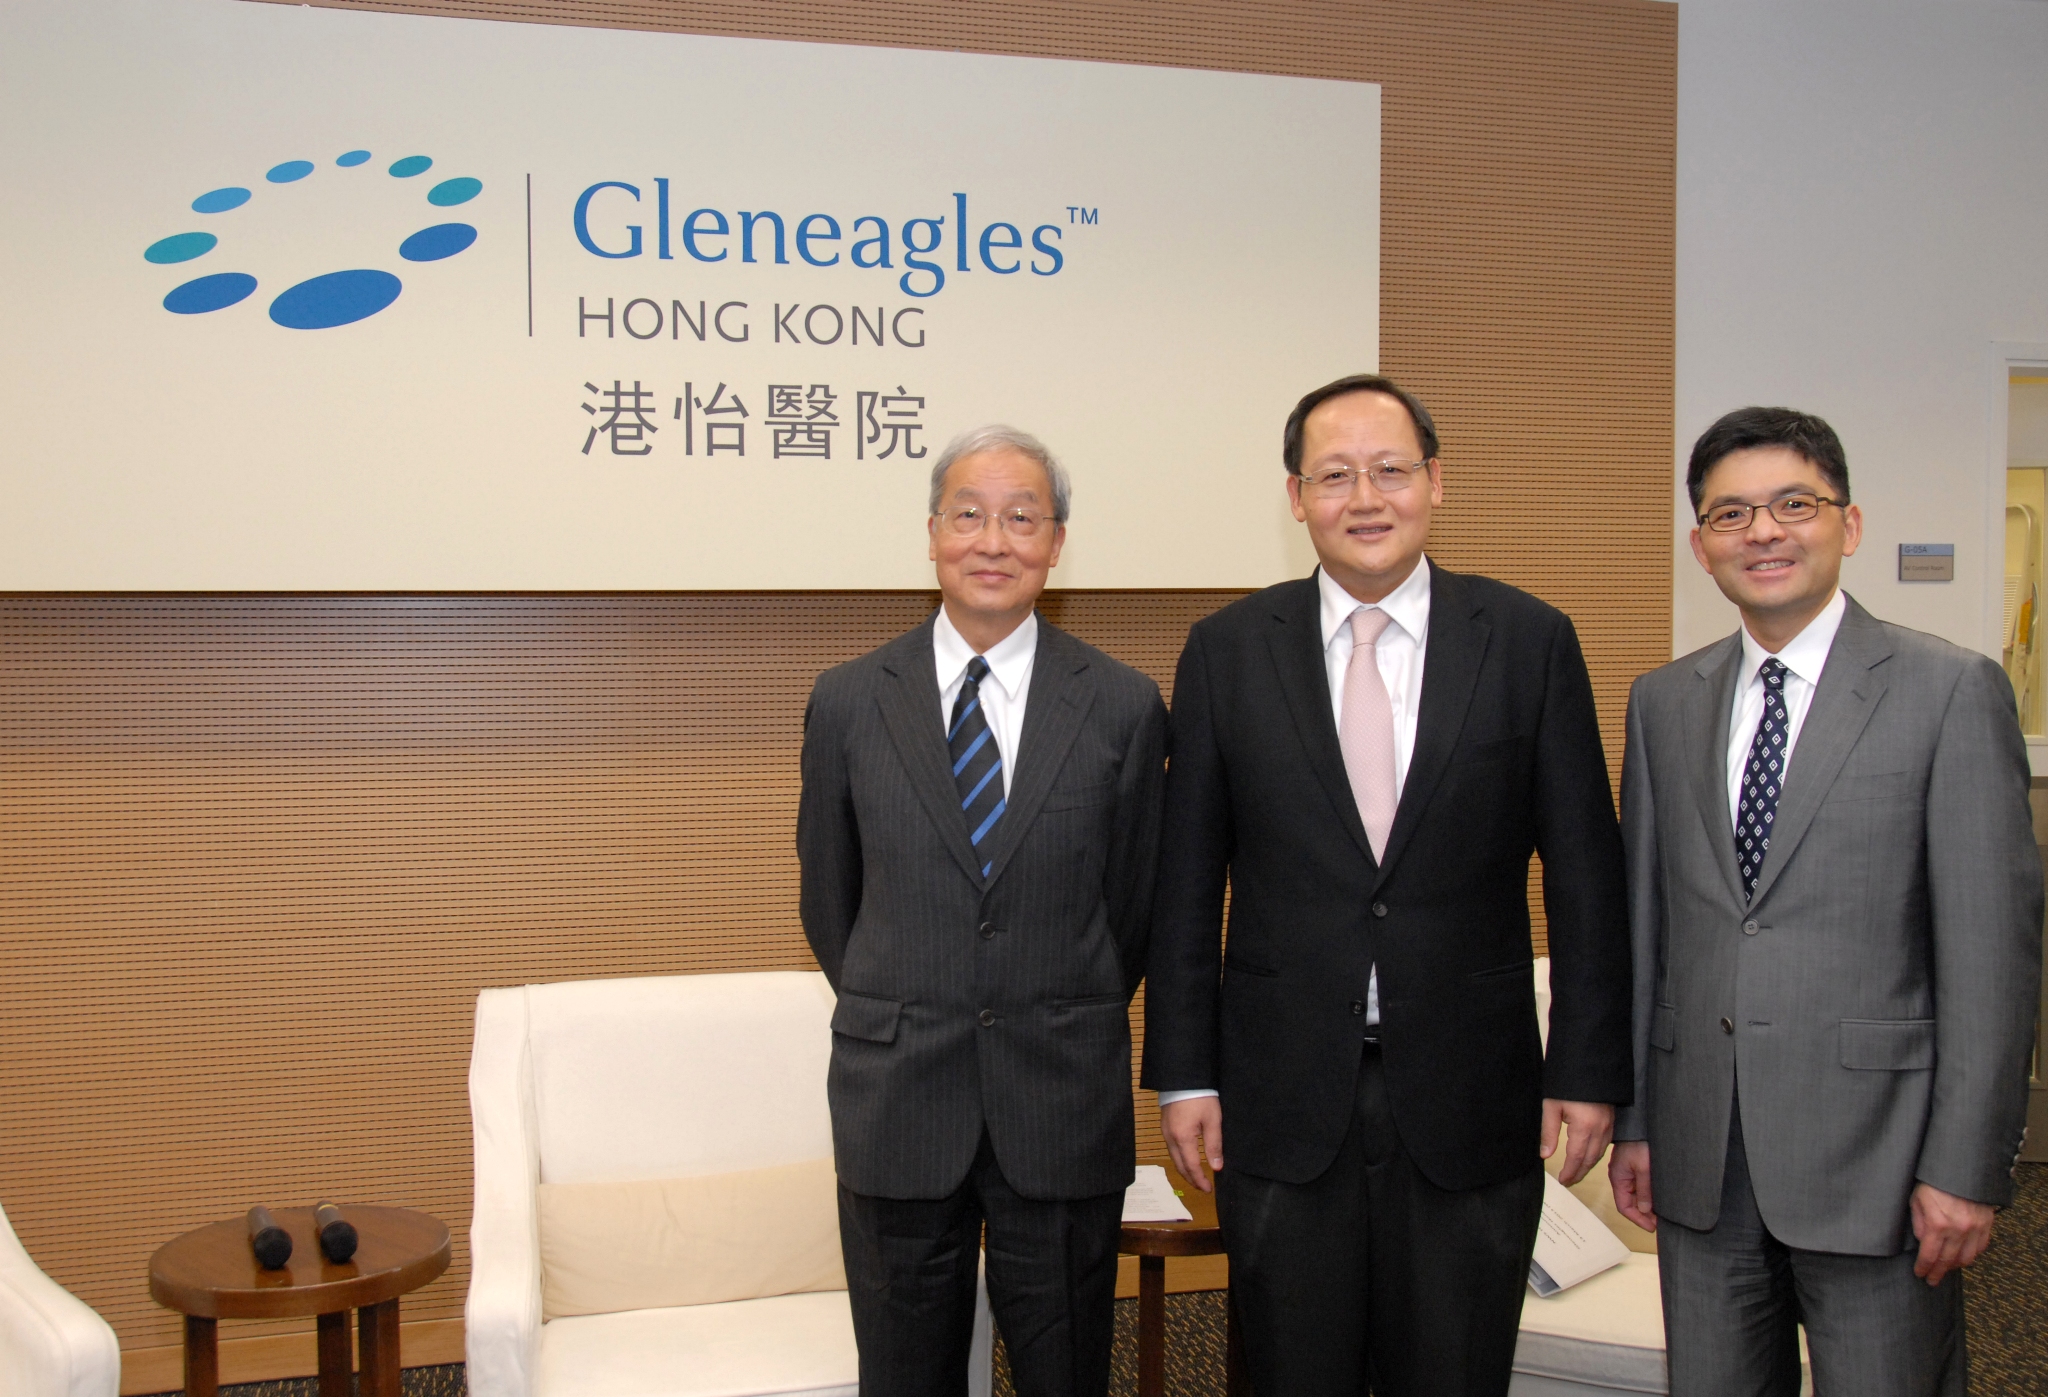 GHK Hospital Limited awarded the Wong Chuk Hang private hospital site